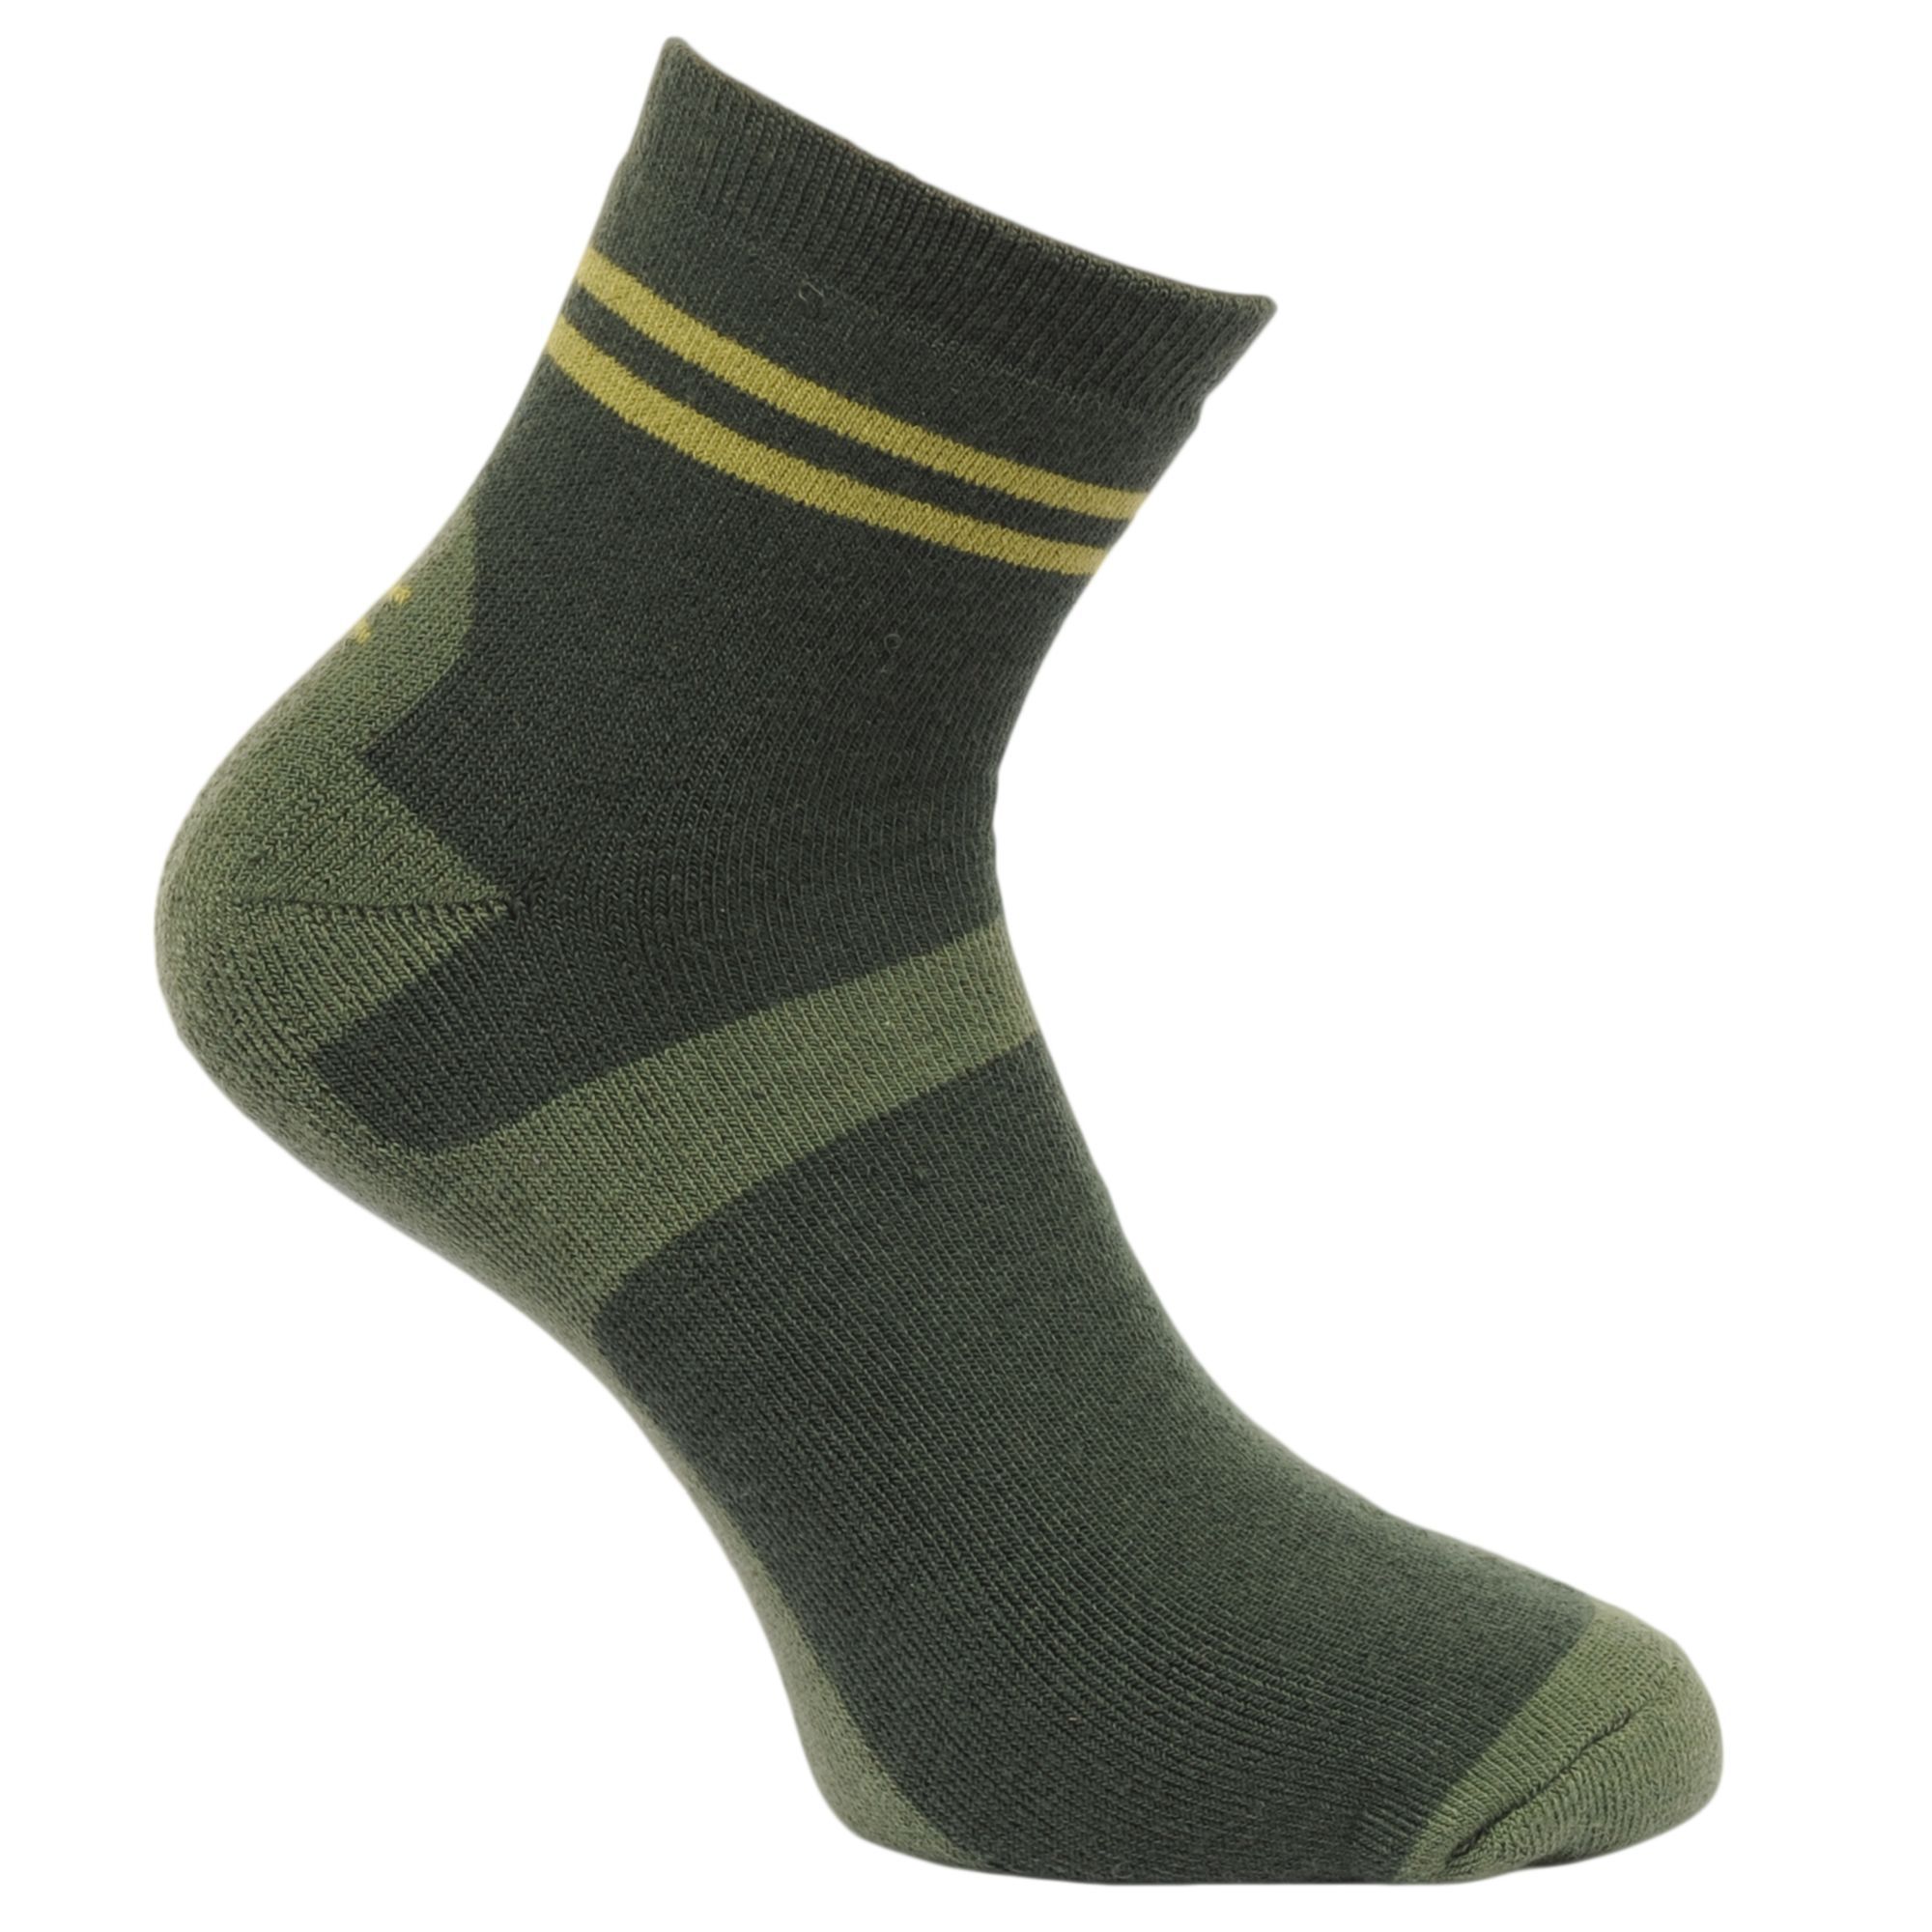 The mens 3 Season Heavyweight Trek & Trail Sock is anatomically designed to provide a high level of underfoot protection and durability.  properties to encourage last longing freshness. Ideal for walking, hiking and rambling in all but the coldest of weather. Polyester 97%, Elastane 3%.